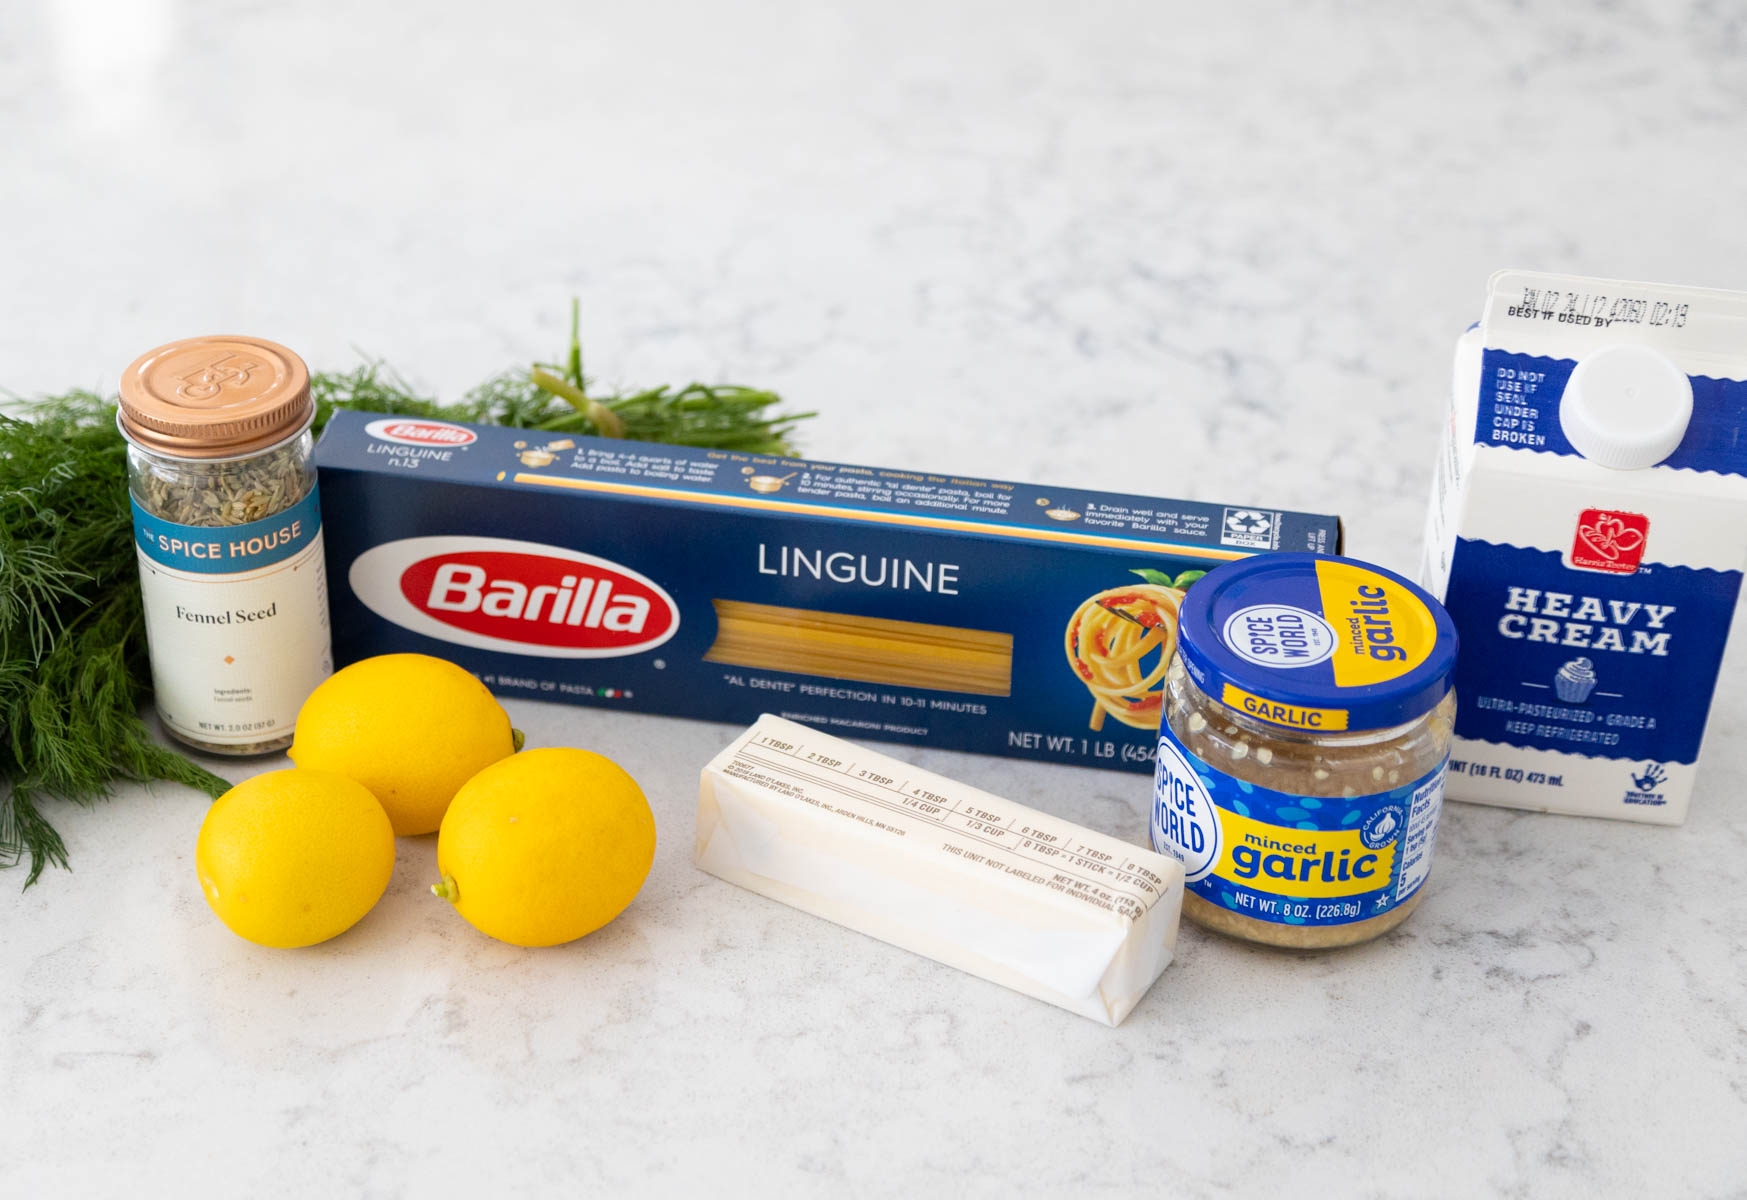 The box of pasta and ingredients to make the lemon cream sauce are on the counter.